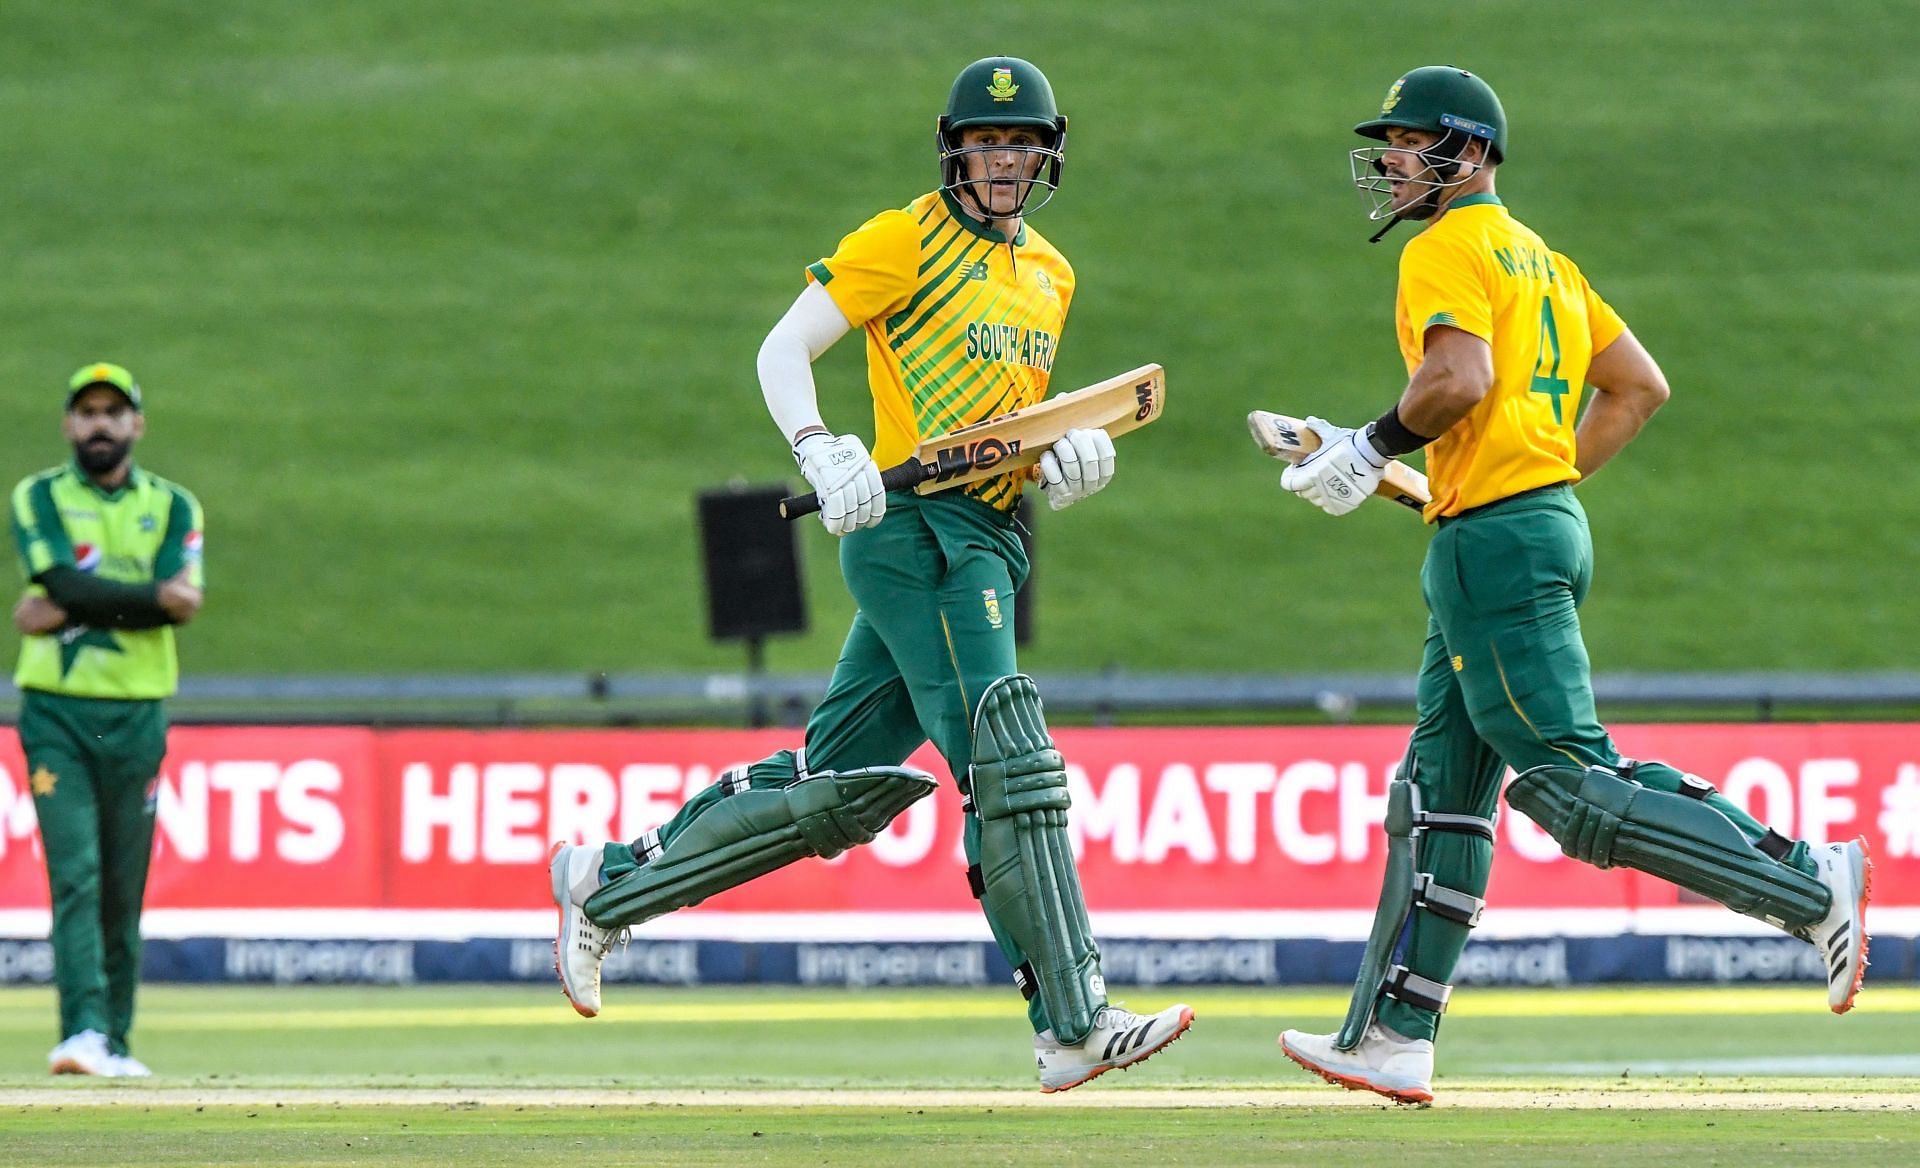 Wihan Lubbe (left) in action for the Proteas&#039; T20I side against Pakistan.